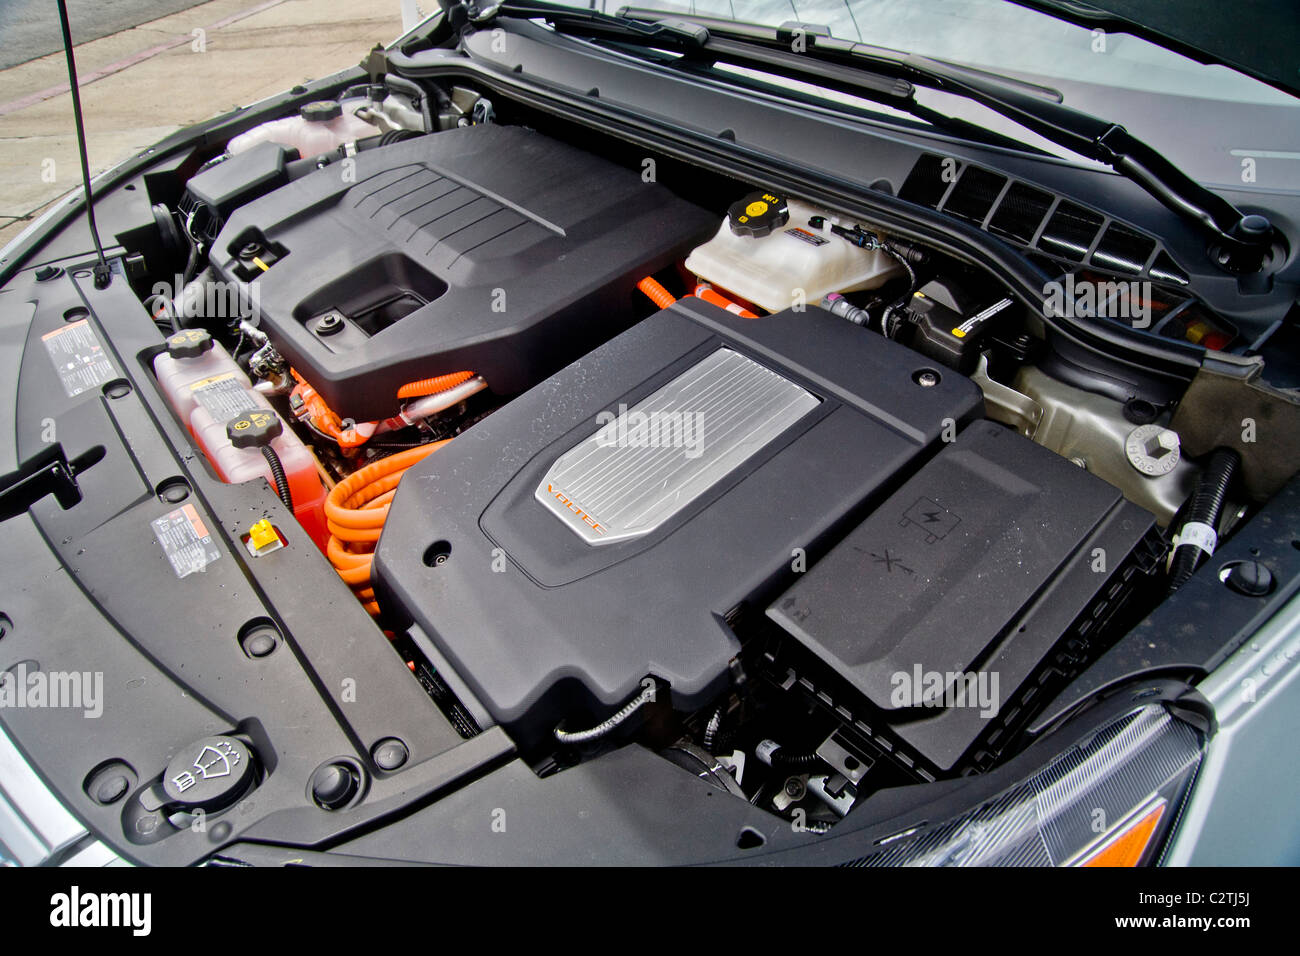 The engine compartment of a Chevrolet Volt hybrid gas/electric car. Right side: the power inverter in top of the electric motor. Stock Photo